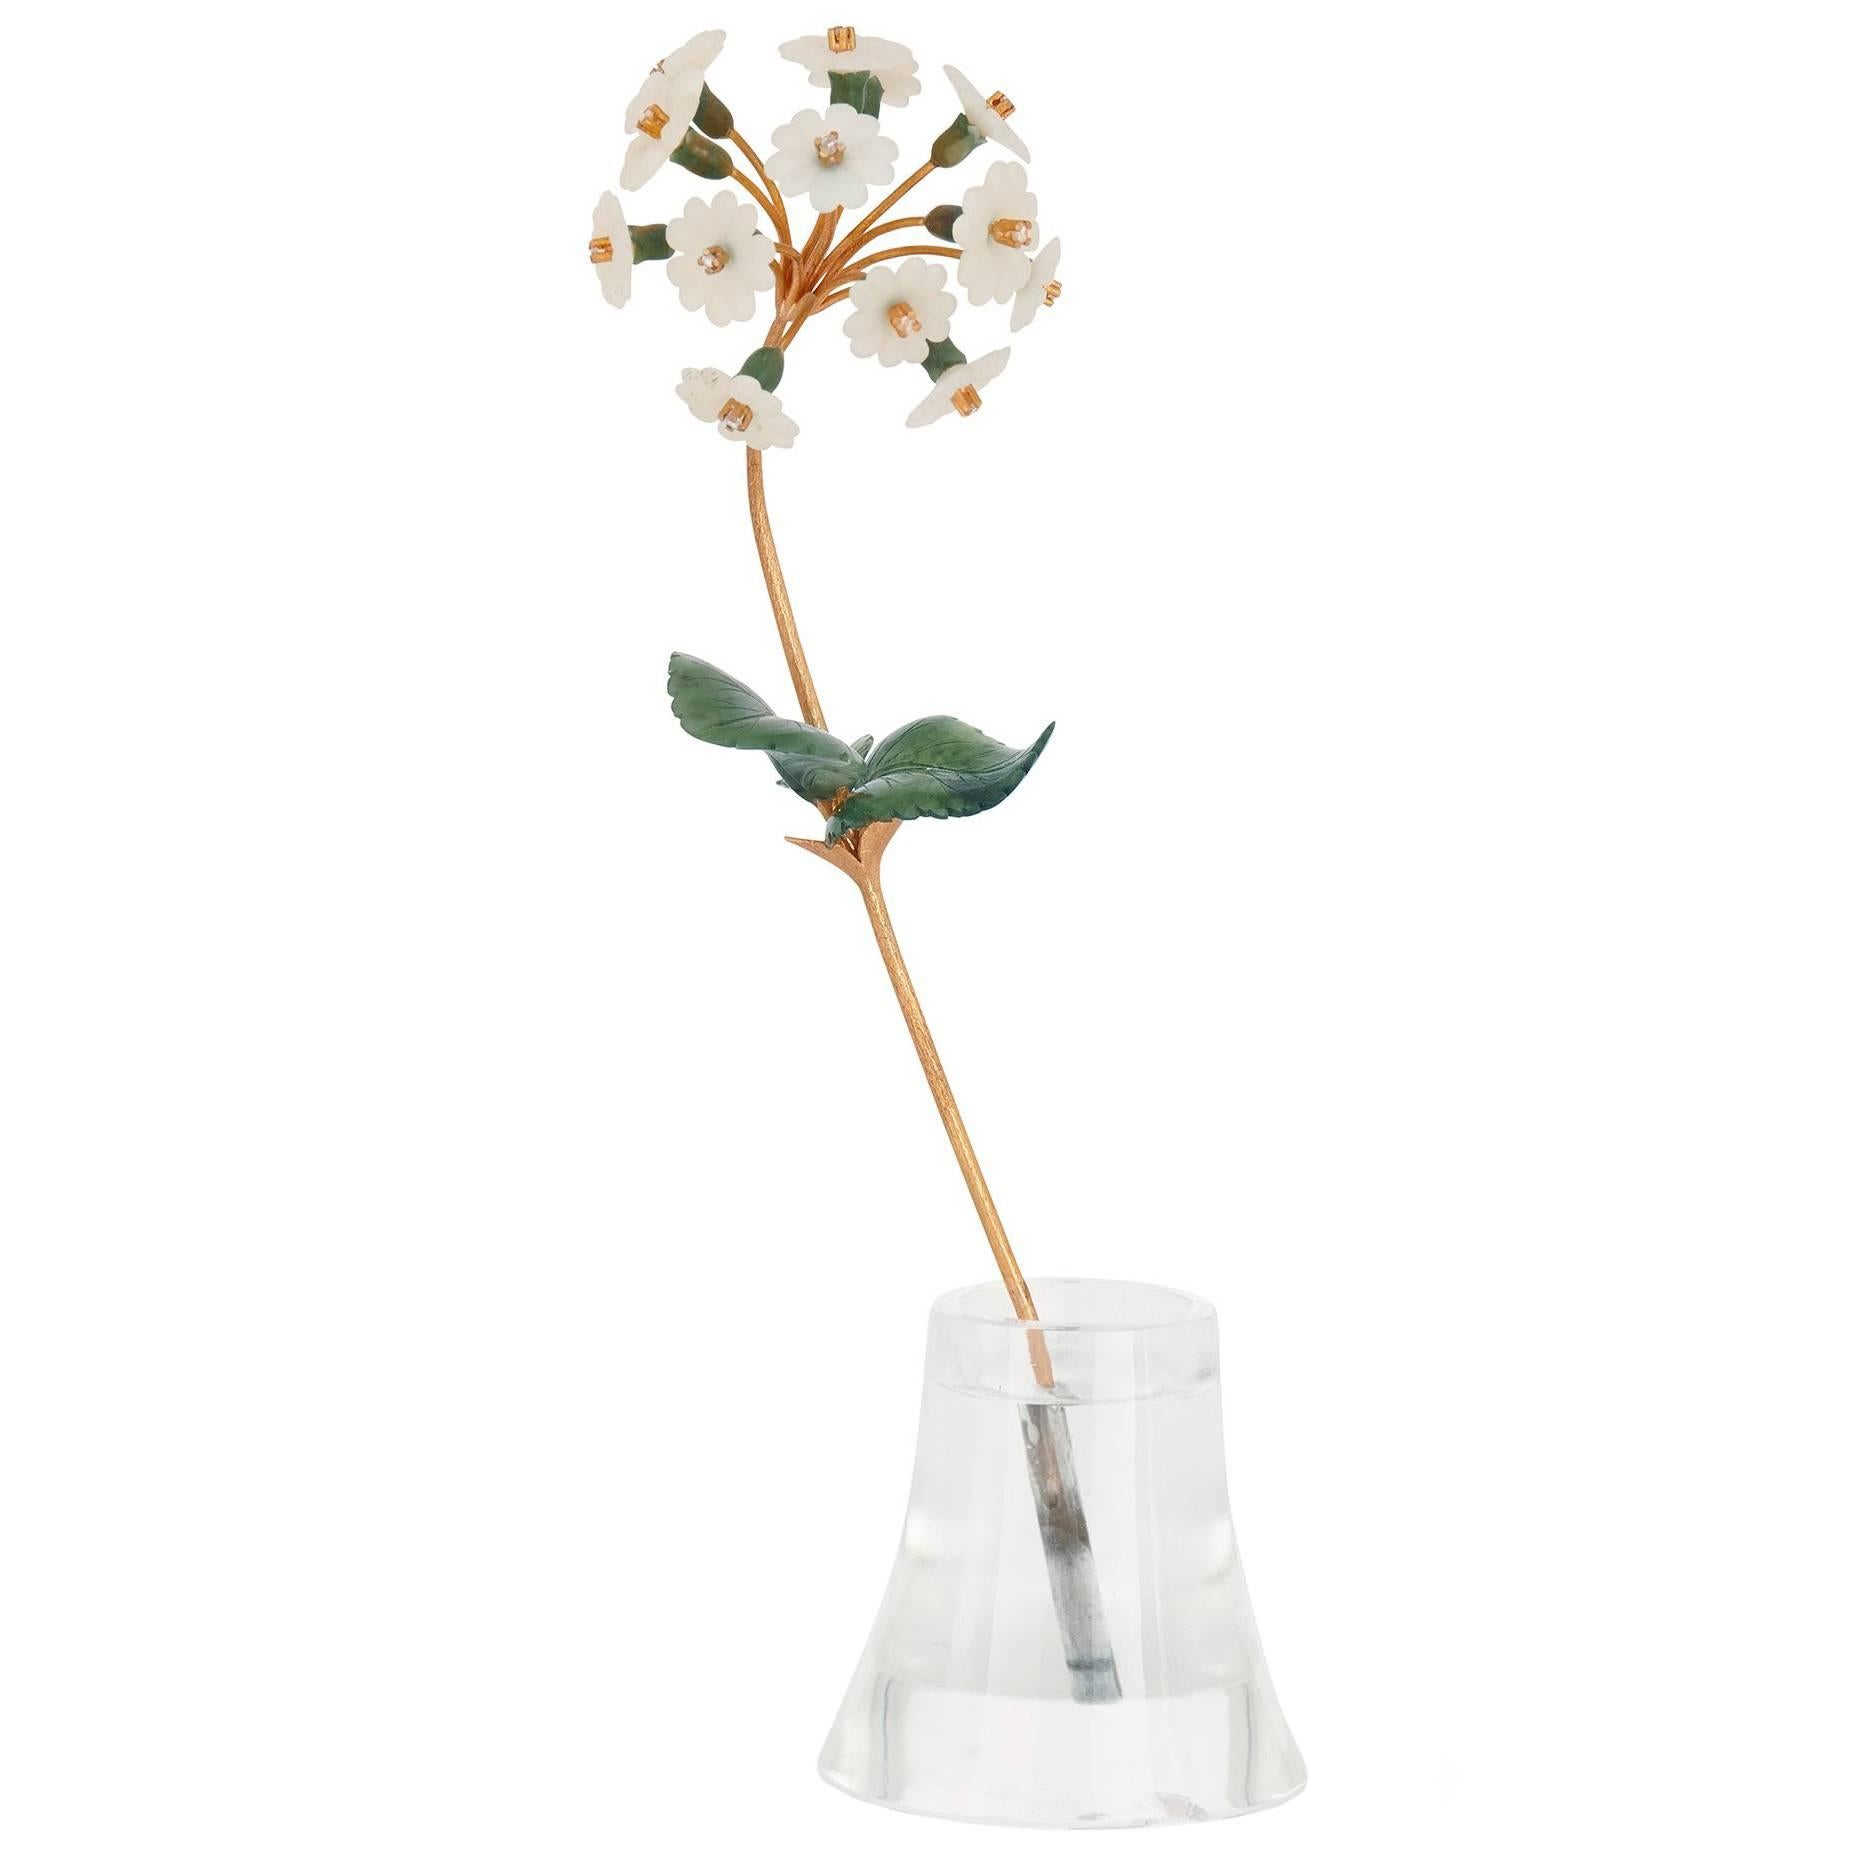 Faberge Flower - 5 For Sale on 1stDibs | faberge flowers for sale 